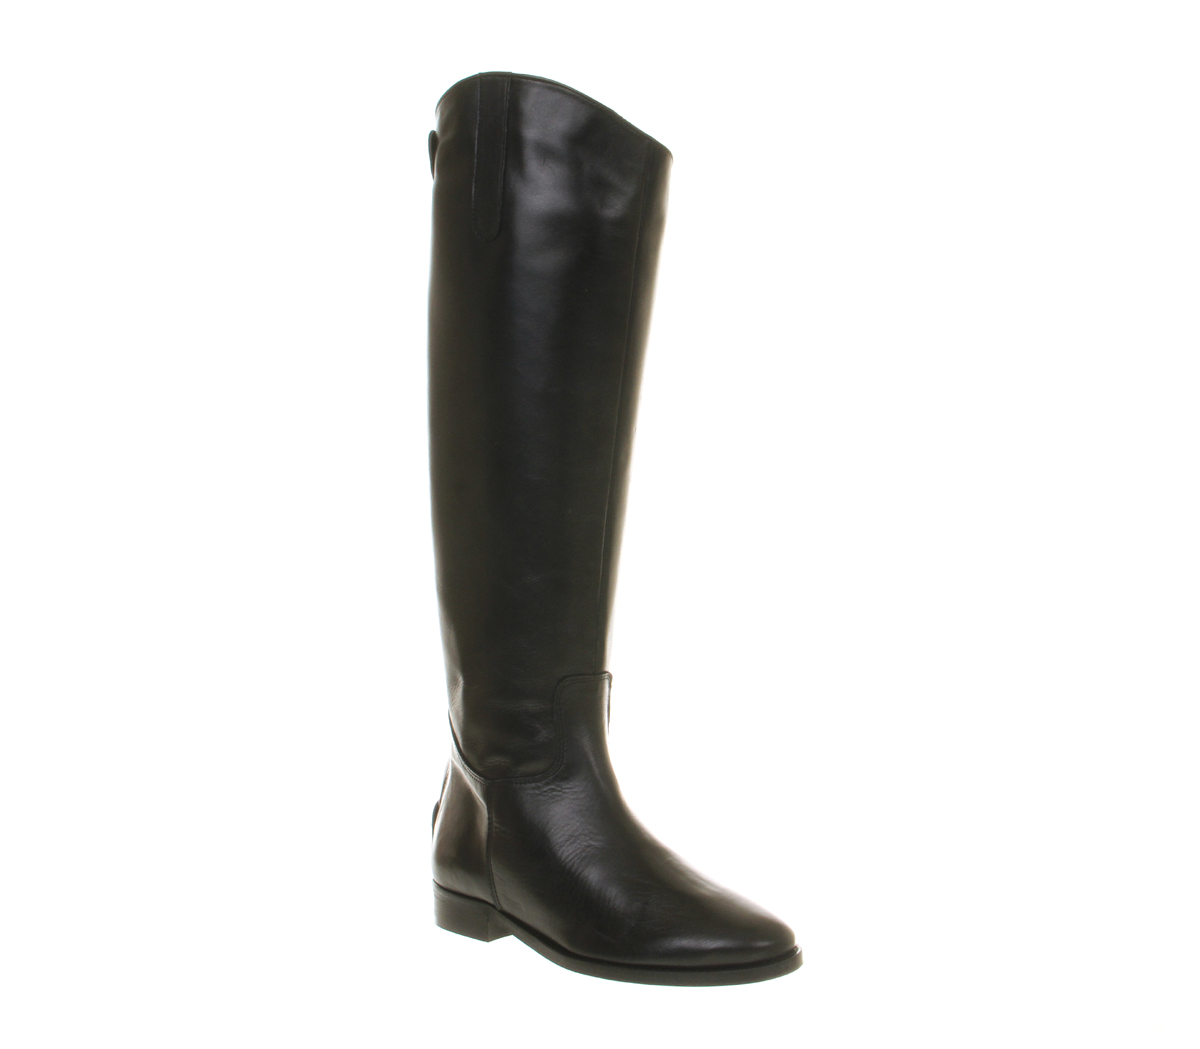 black leather riding boots